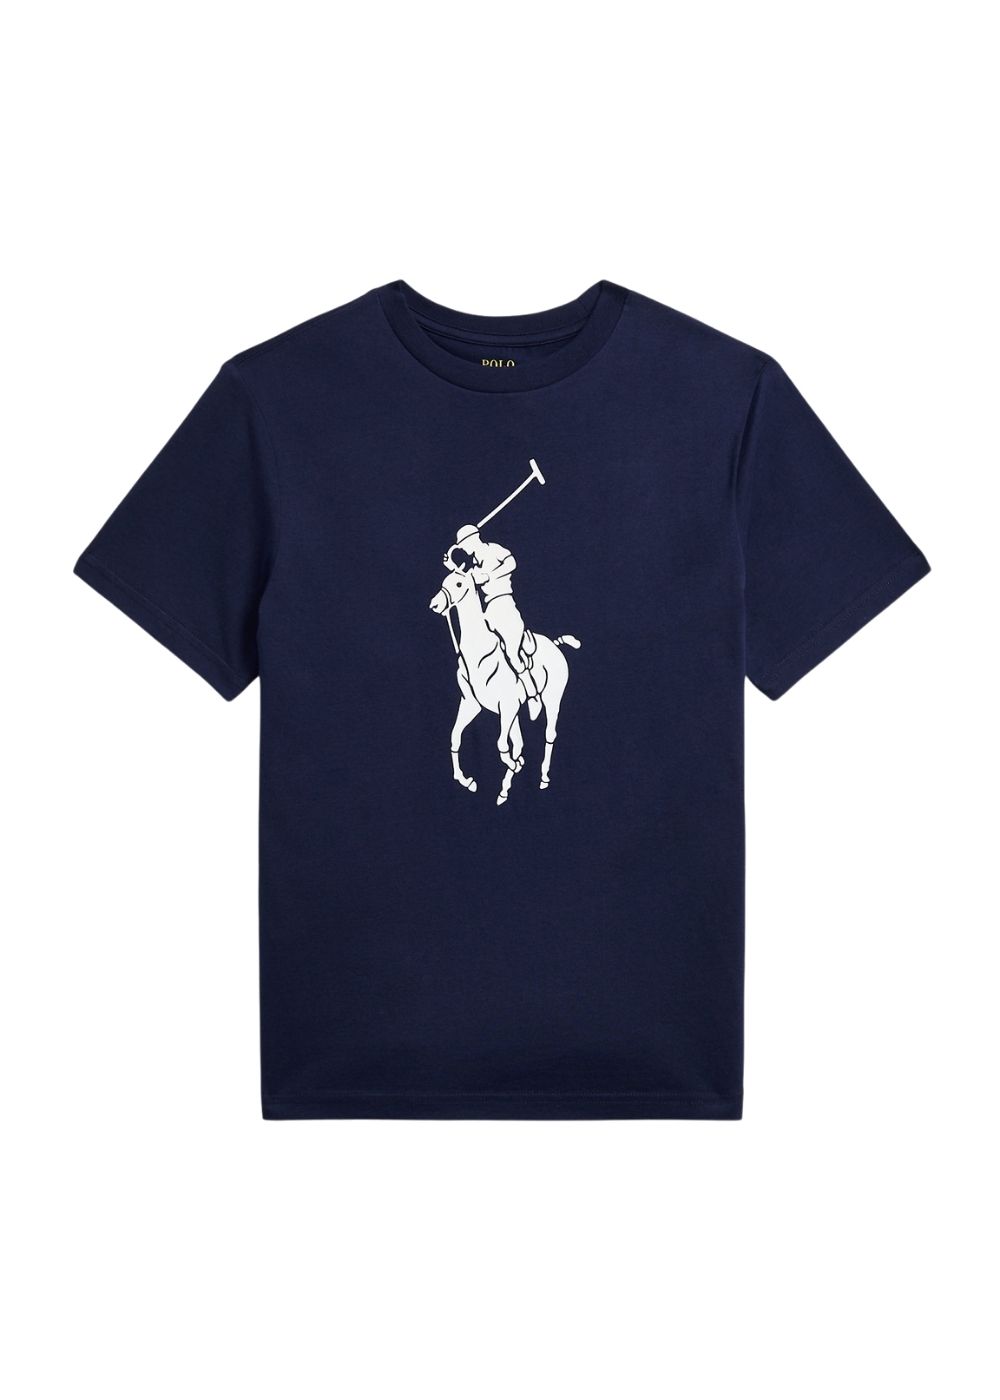 Featured image for “Polo Ralph Lauren T-shirt Cambia Colore”